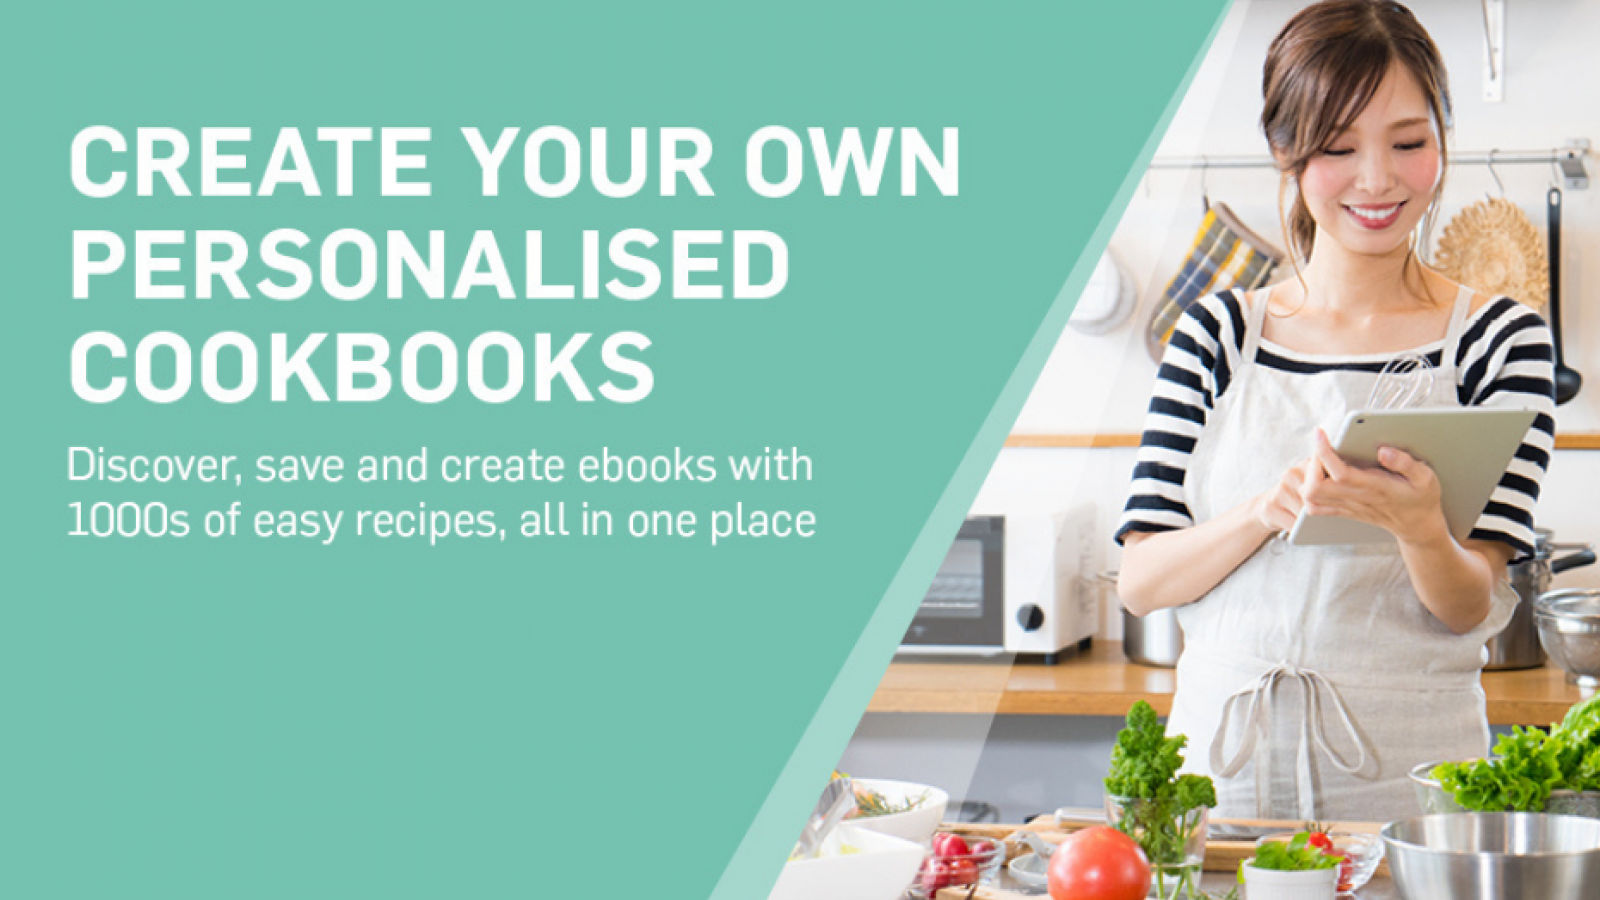 My Favorite Recipes: Make Your Own Cookbook, Personalized Recipe